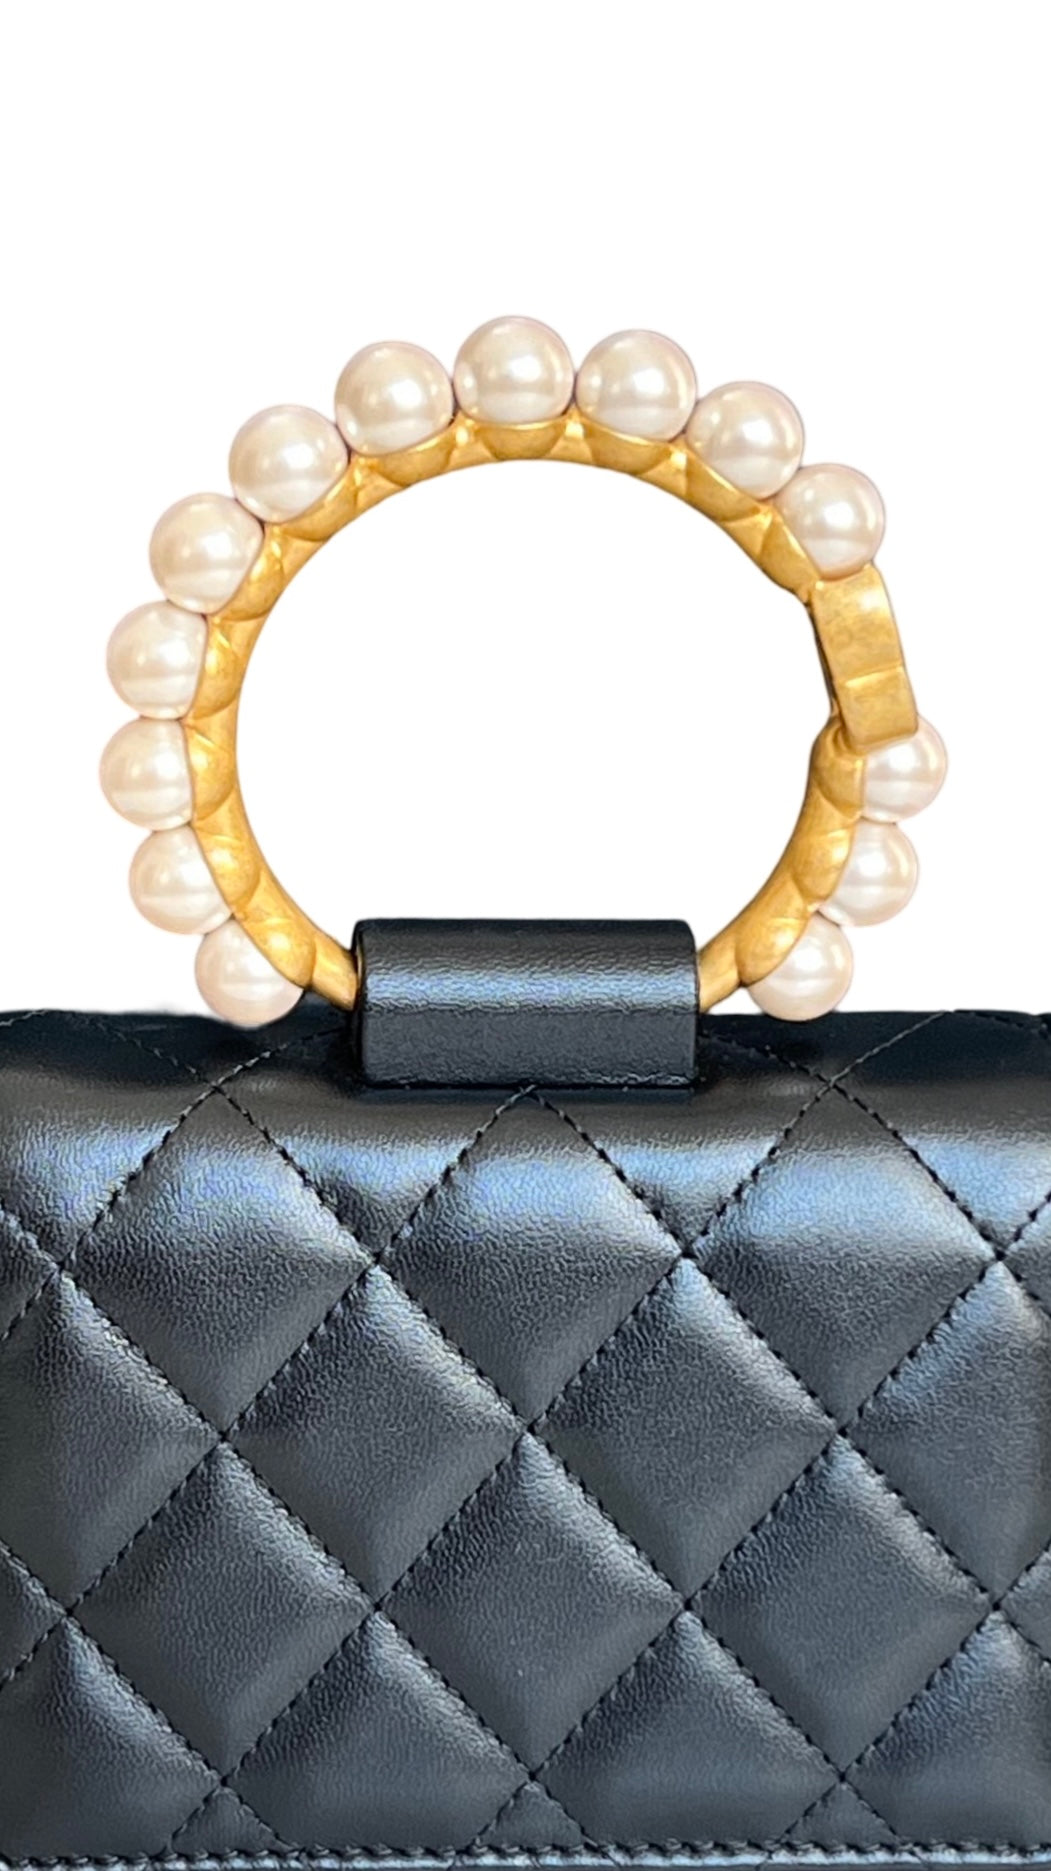 Chanel Pearl Handle Clutch with Chain